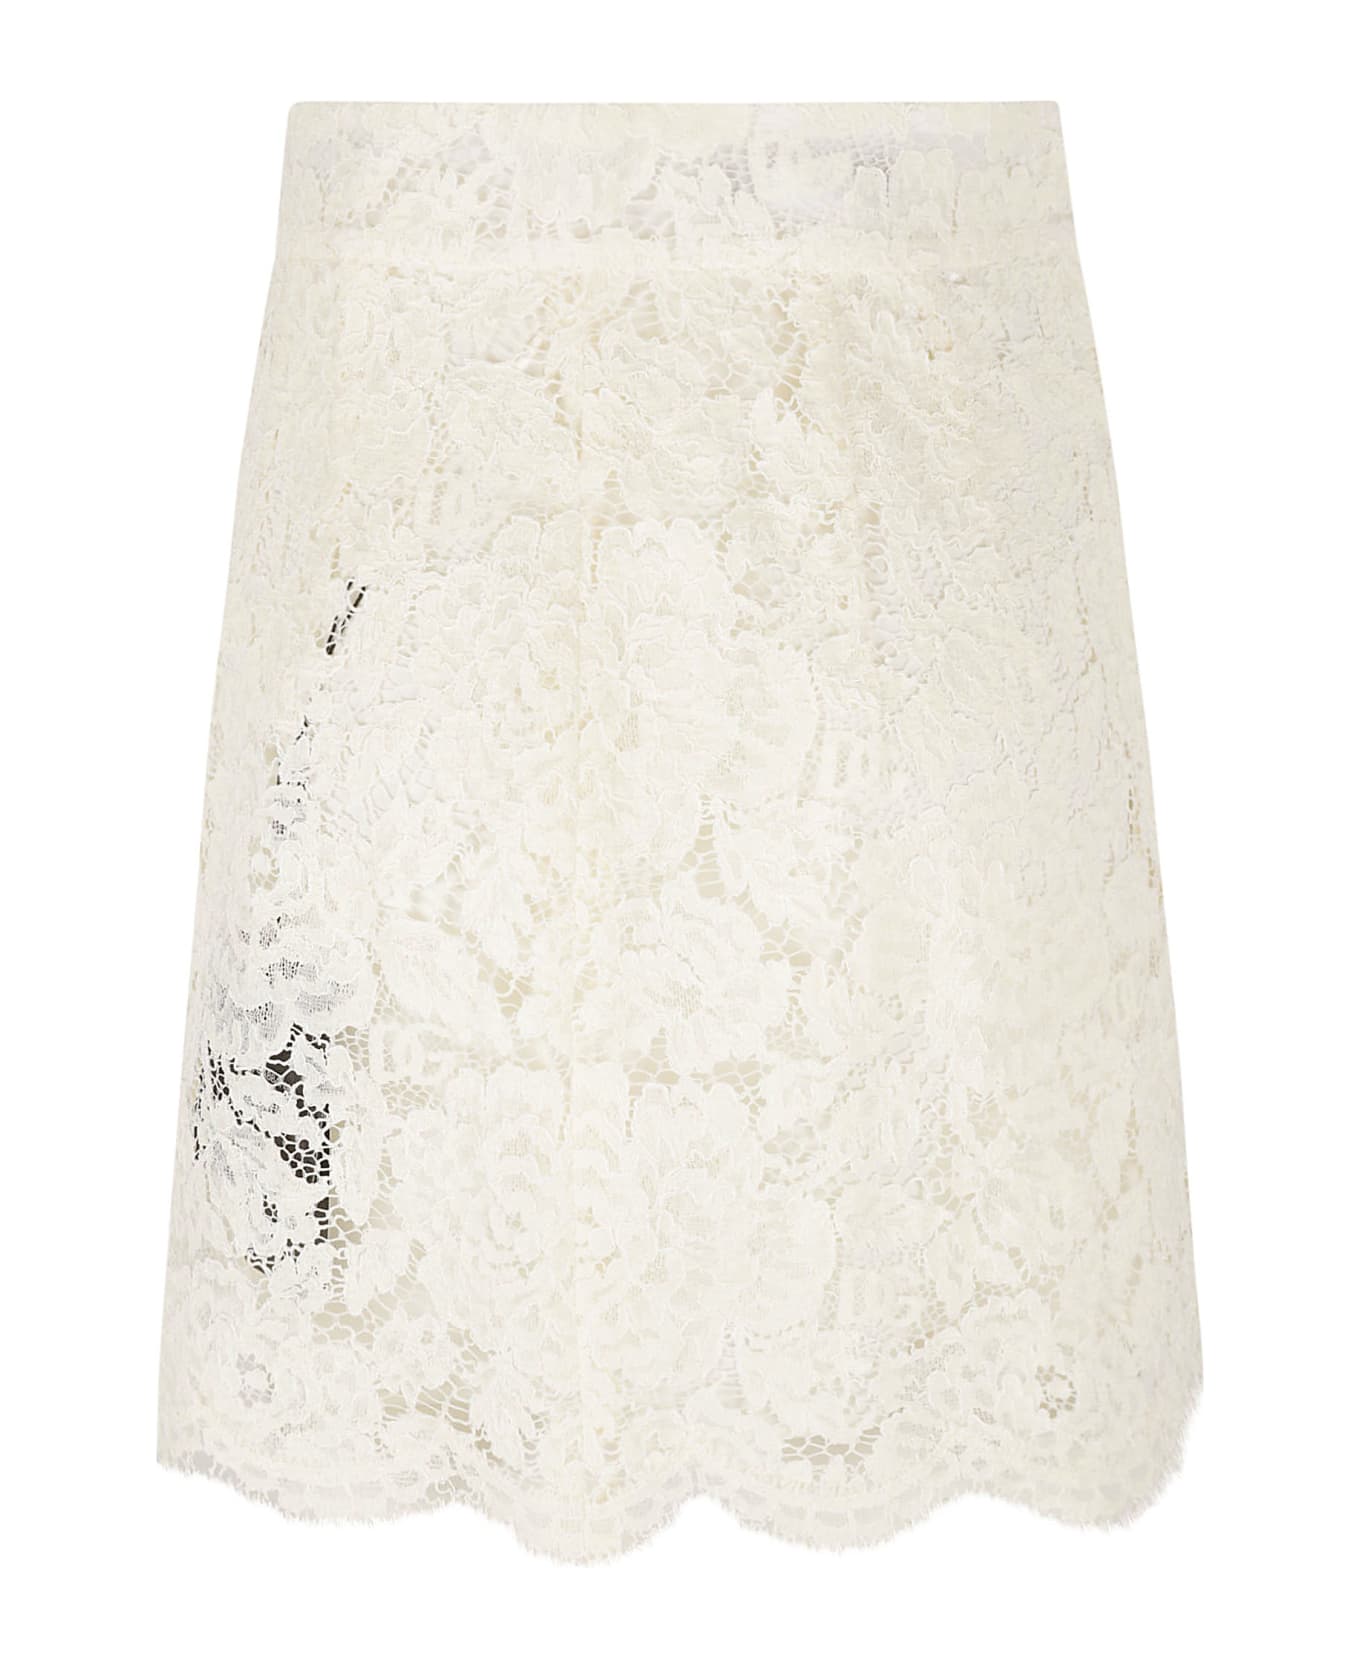 Dolce & Gabbana Floral Embroidered Perforated Skirt - Bianco naturale